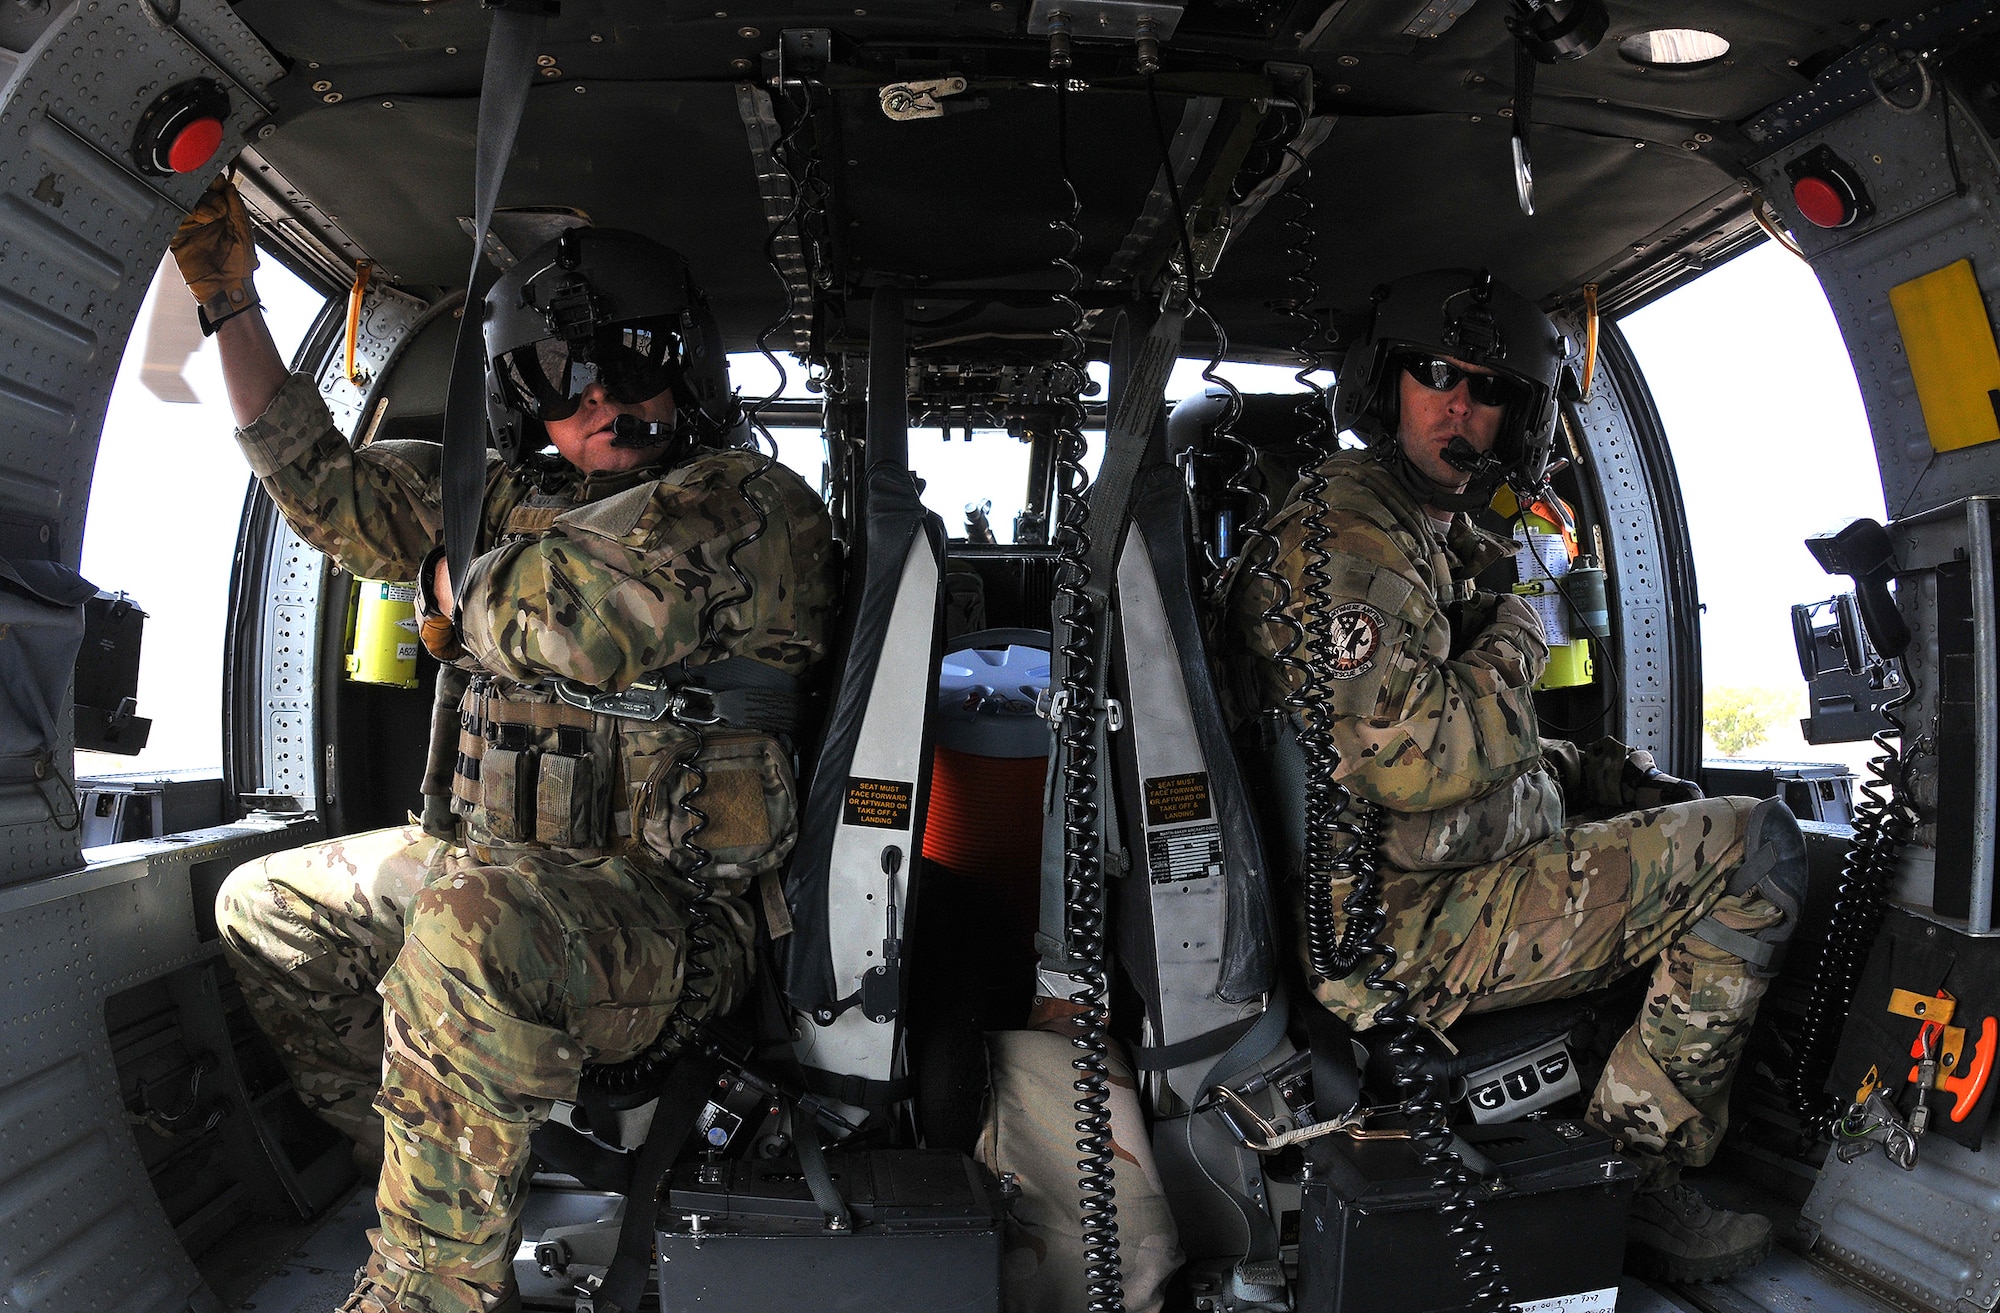 DAVIS-MONTHAN AIR FORCE BASE, Ariz. – Special mission aviation Airmen assigned to the 305th Rescue Squadron, participate in a training mission March 4 onboard an HH-60G Pave Hawk helicopter. The 305th RQS is assigned to the 943rd Rescue Group, which is assigned to the 920th Rescue Wing, Patrick AFB, Fla. The 943rd RQG trains and equips Citizen Airmen to perform personnel recovery operations worldwide. (U.S. Air Force photo/Tech. Sgt. Frank Oliver)